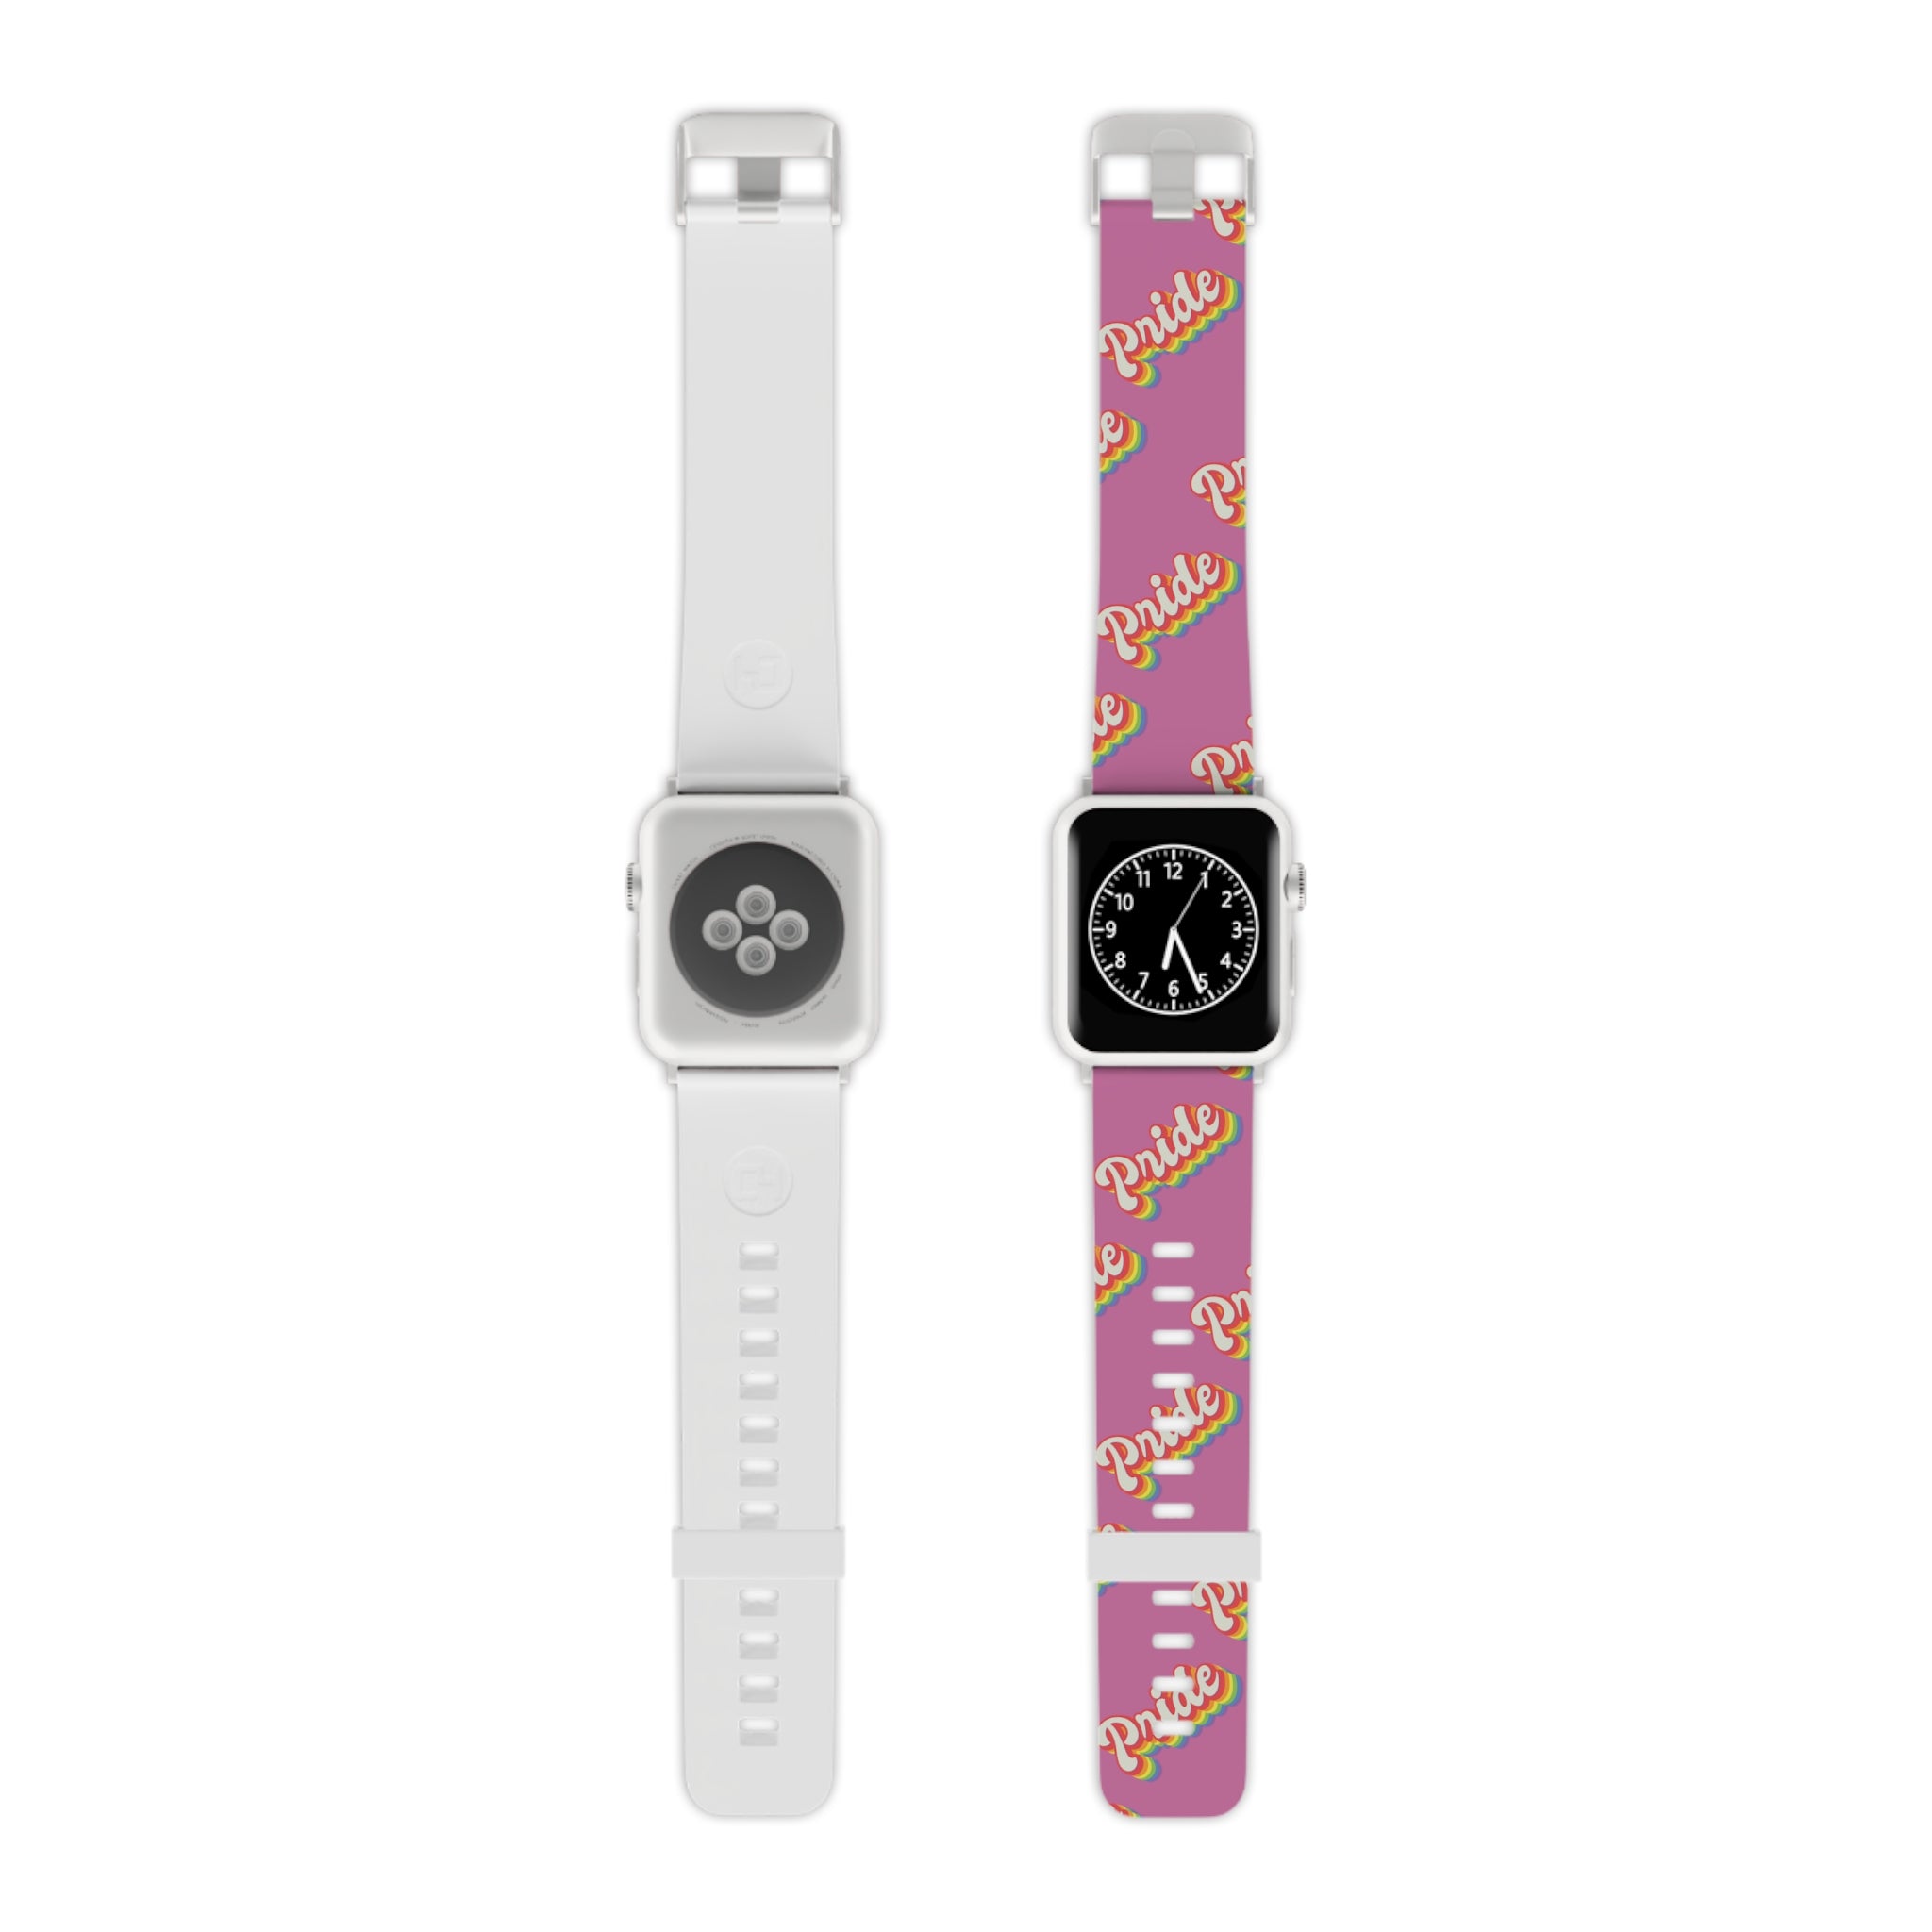 A custom-printed pair of fashionable alternative Pride Bands for Apple Watch in pink and white.